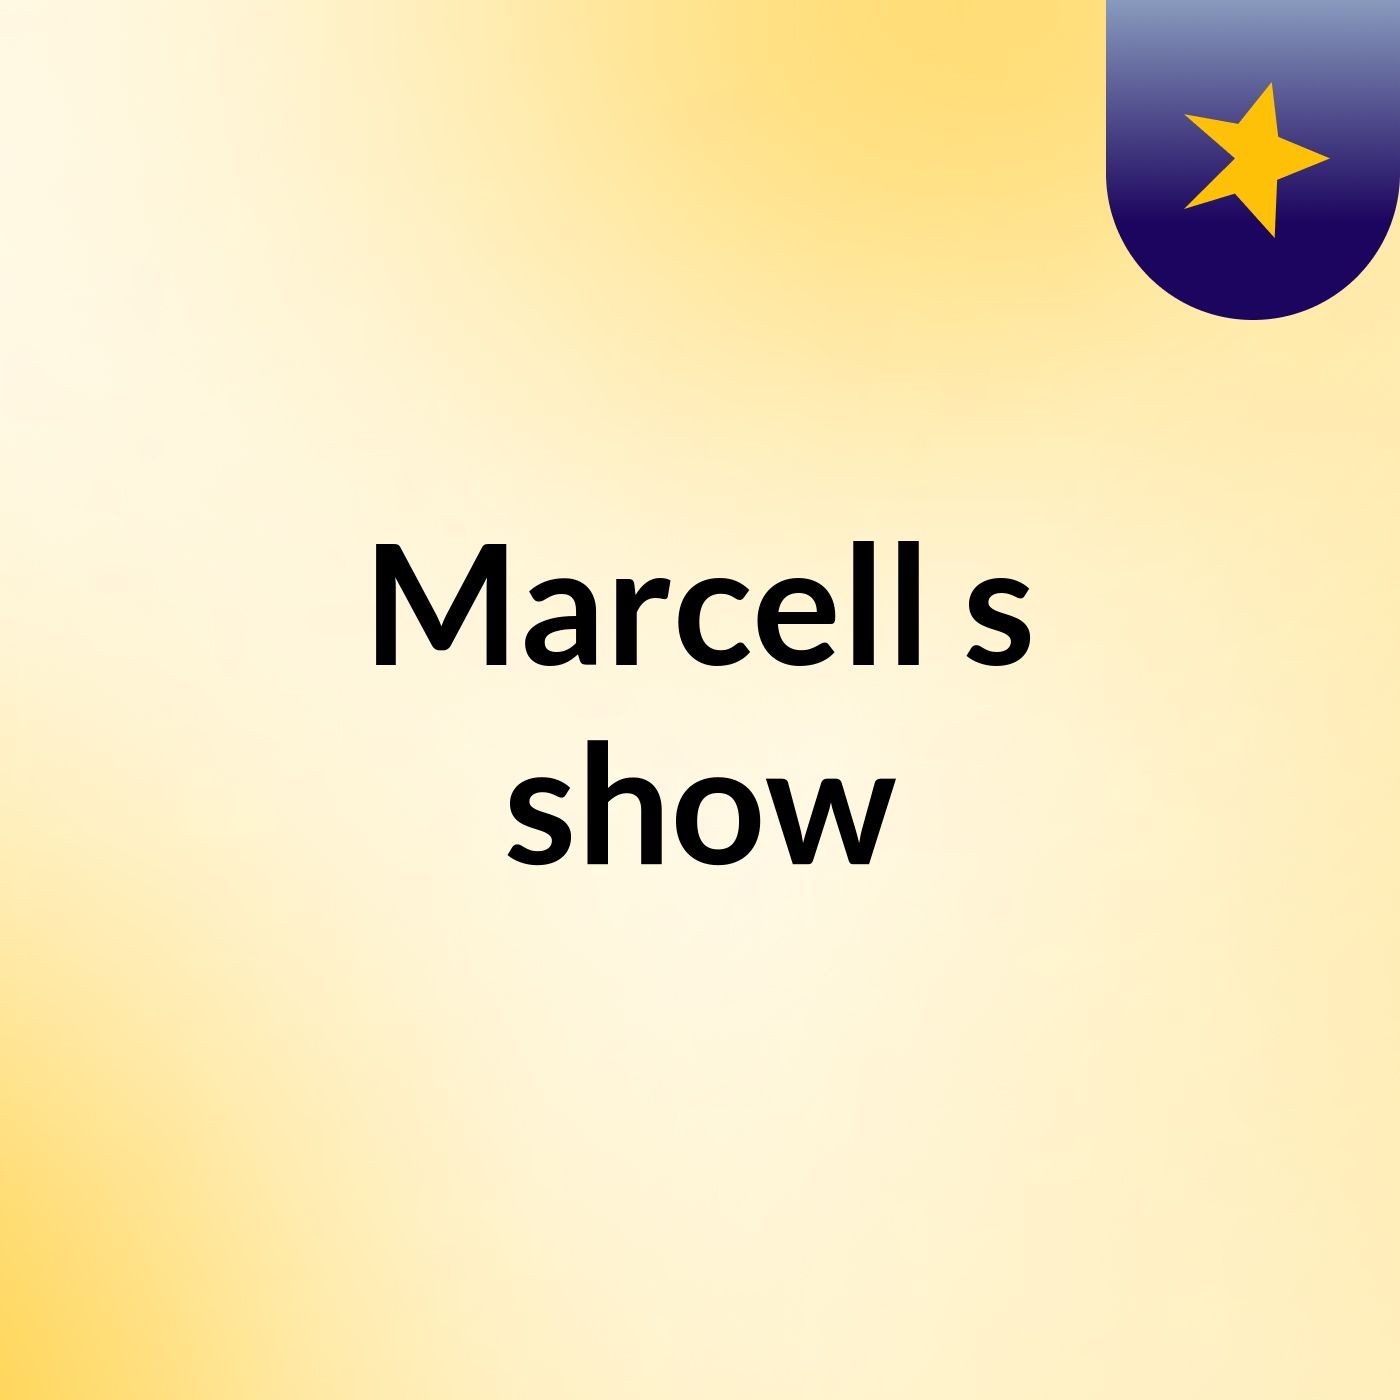 Marcell's show